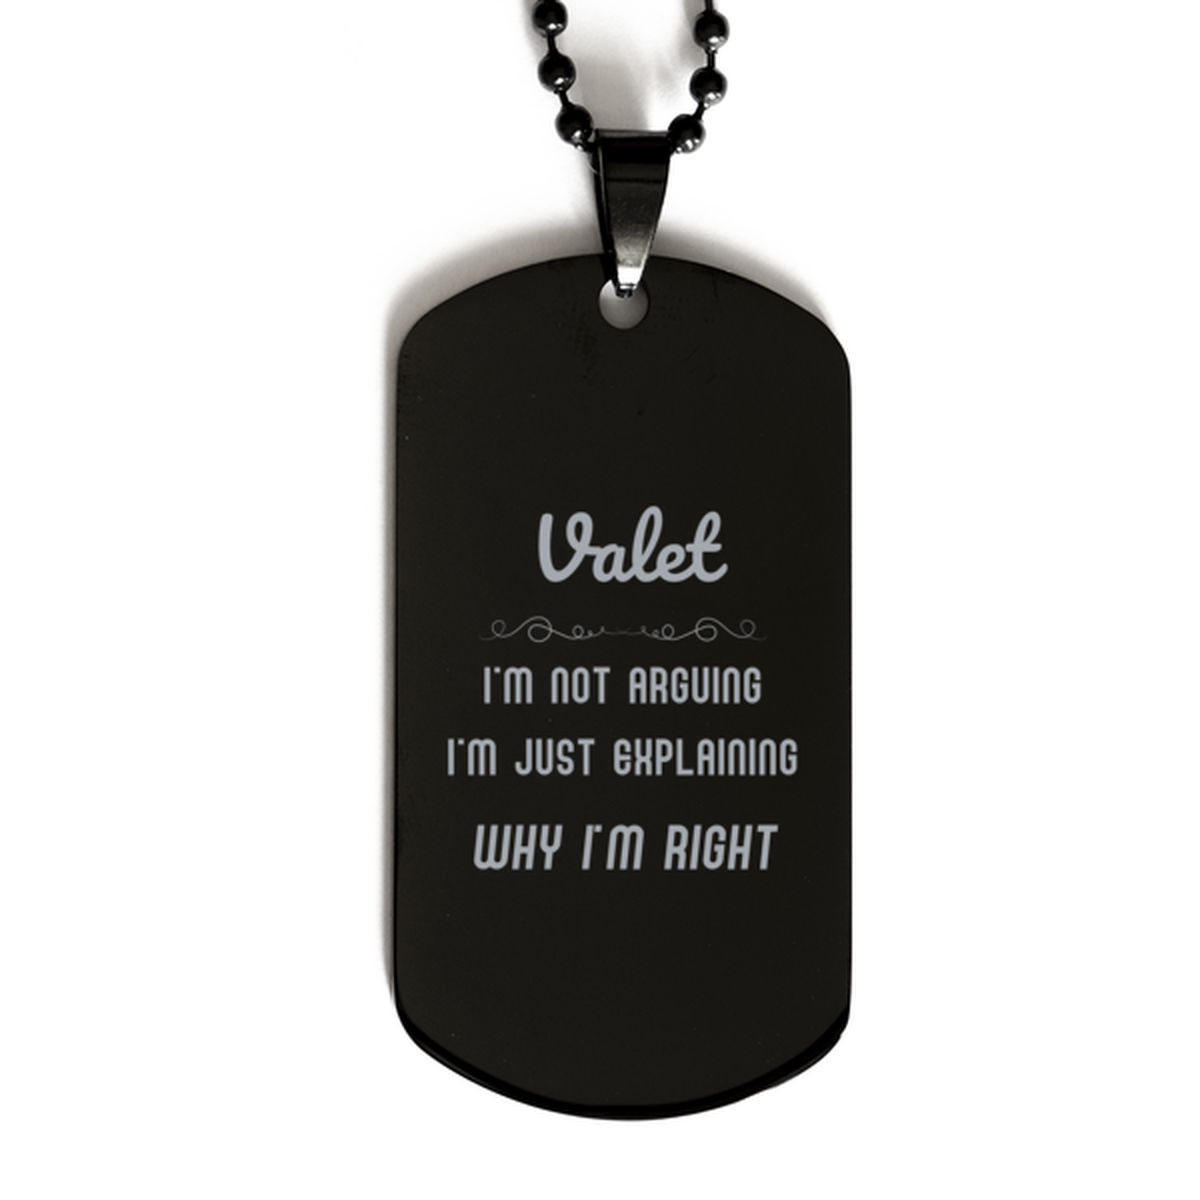 Valet I'm not Arguing. I'm Just Explaining Why I'm RIGHT Black Dog Tag, Funny Saying Quote Valet Gifts For Valet Graduation Birthday Christmas Gifts for Men Women Coworker